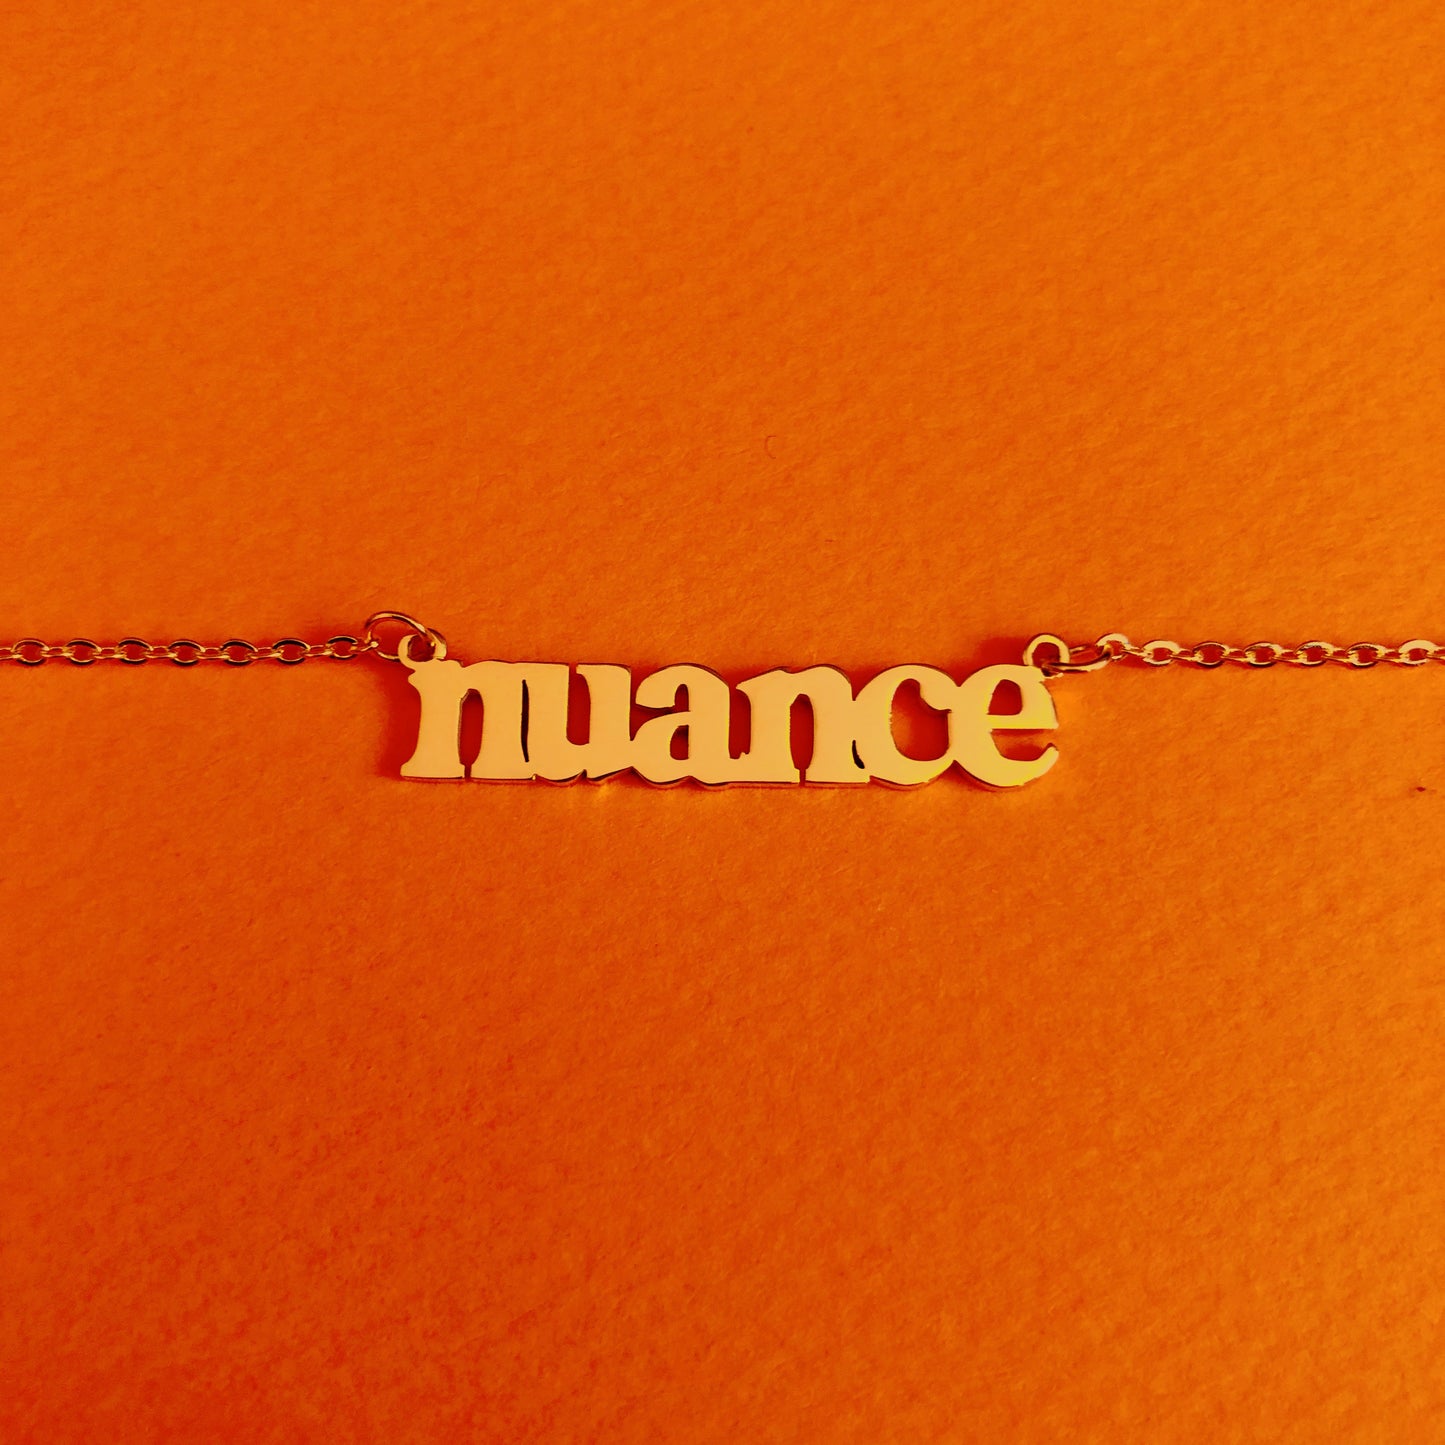 "Nuance" 18K Gold plated necklace - Brownie Points for You